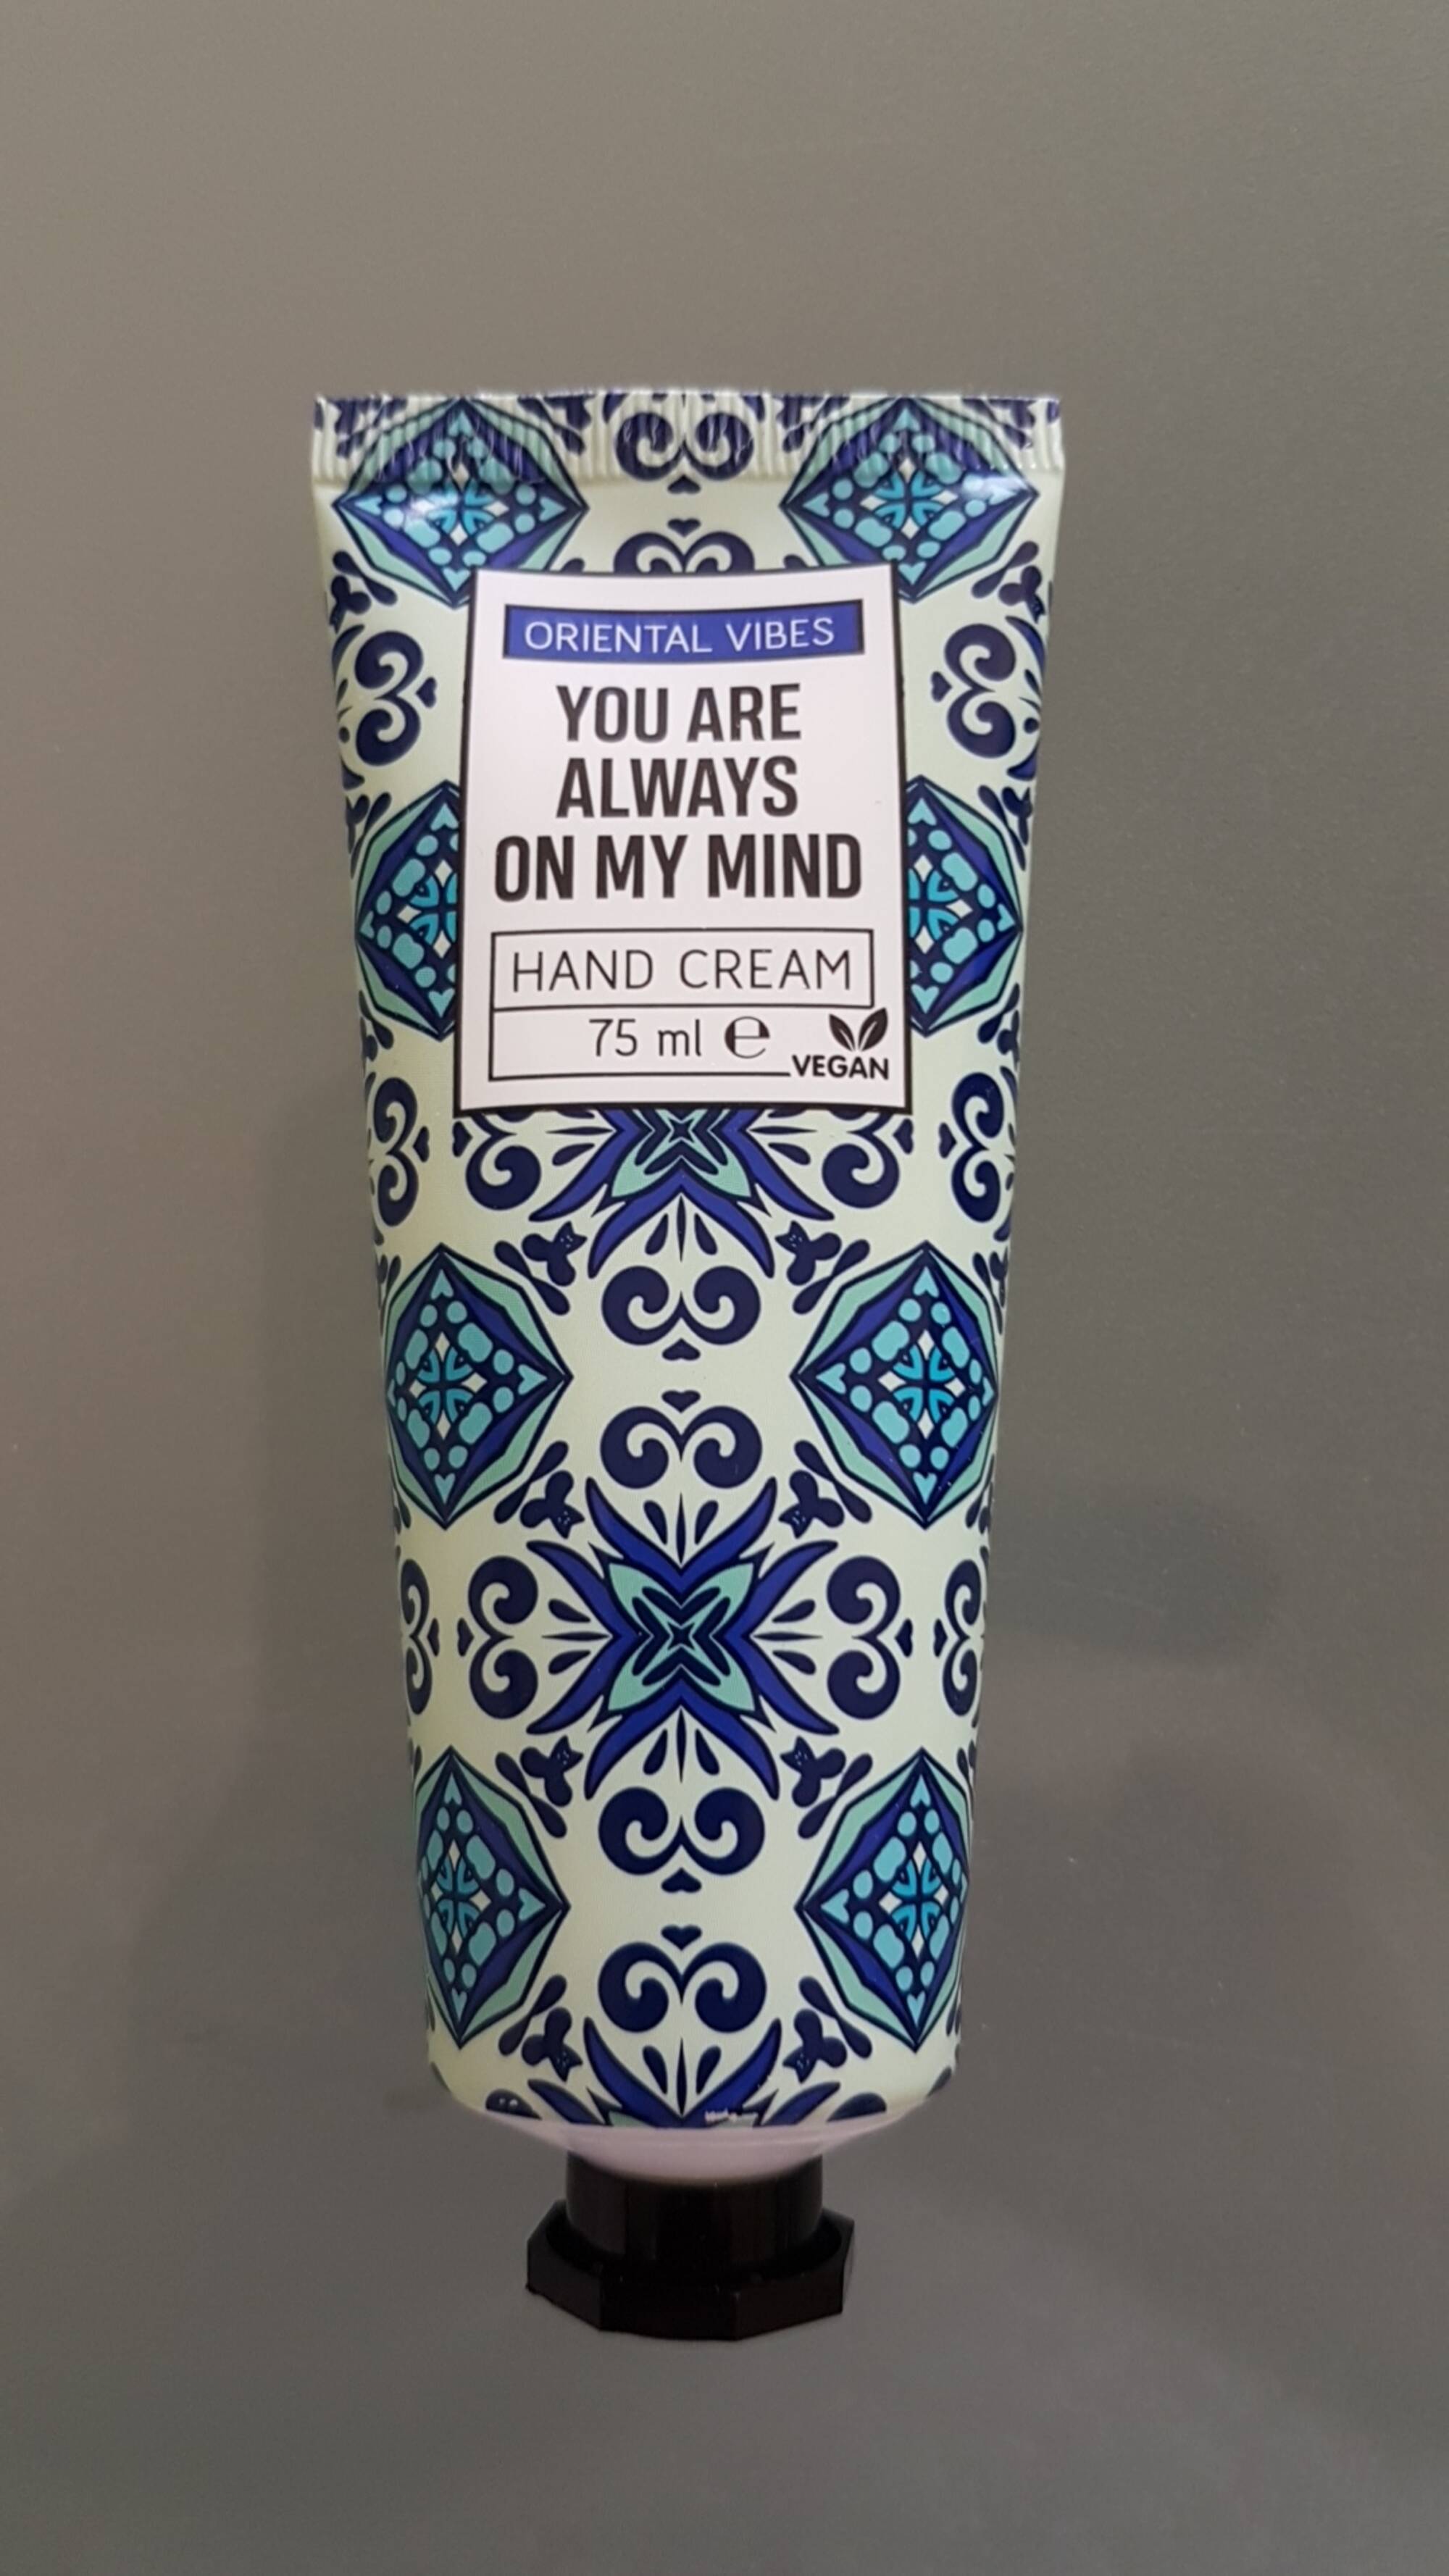 MAXBRANDS - Oriental vibes - You are always on my mind - Hand cream